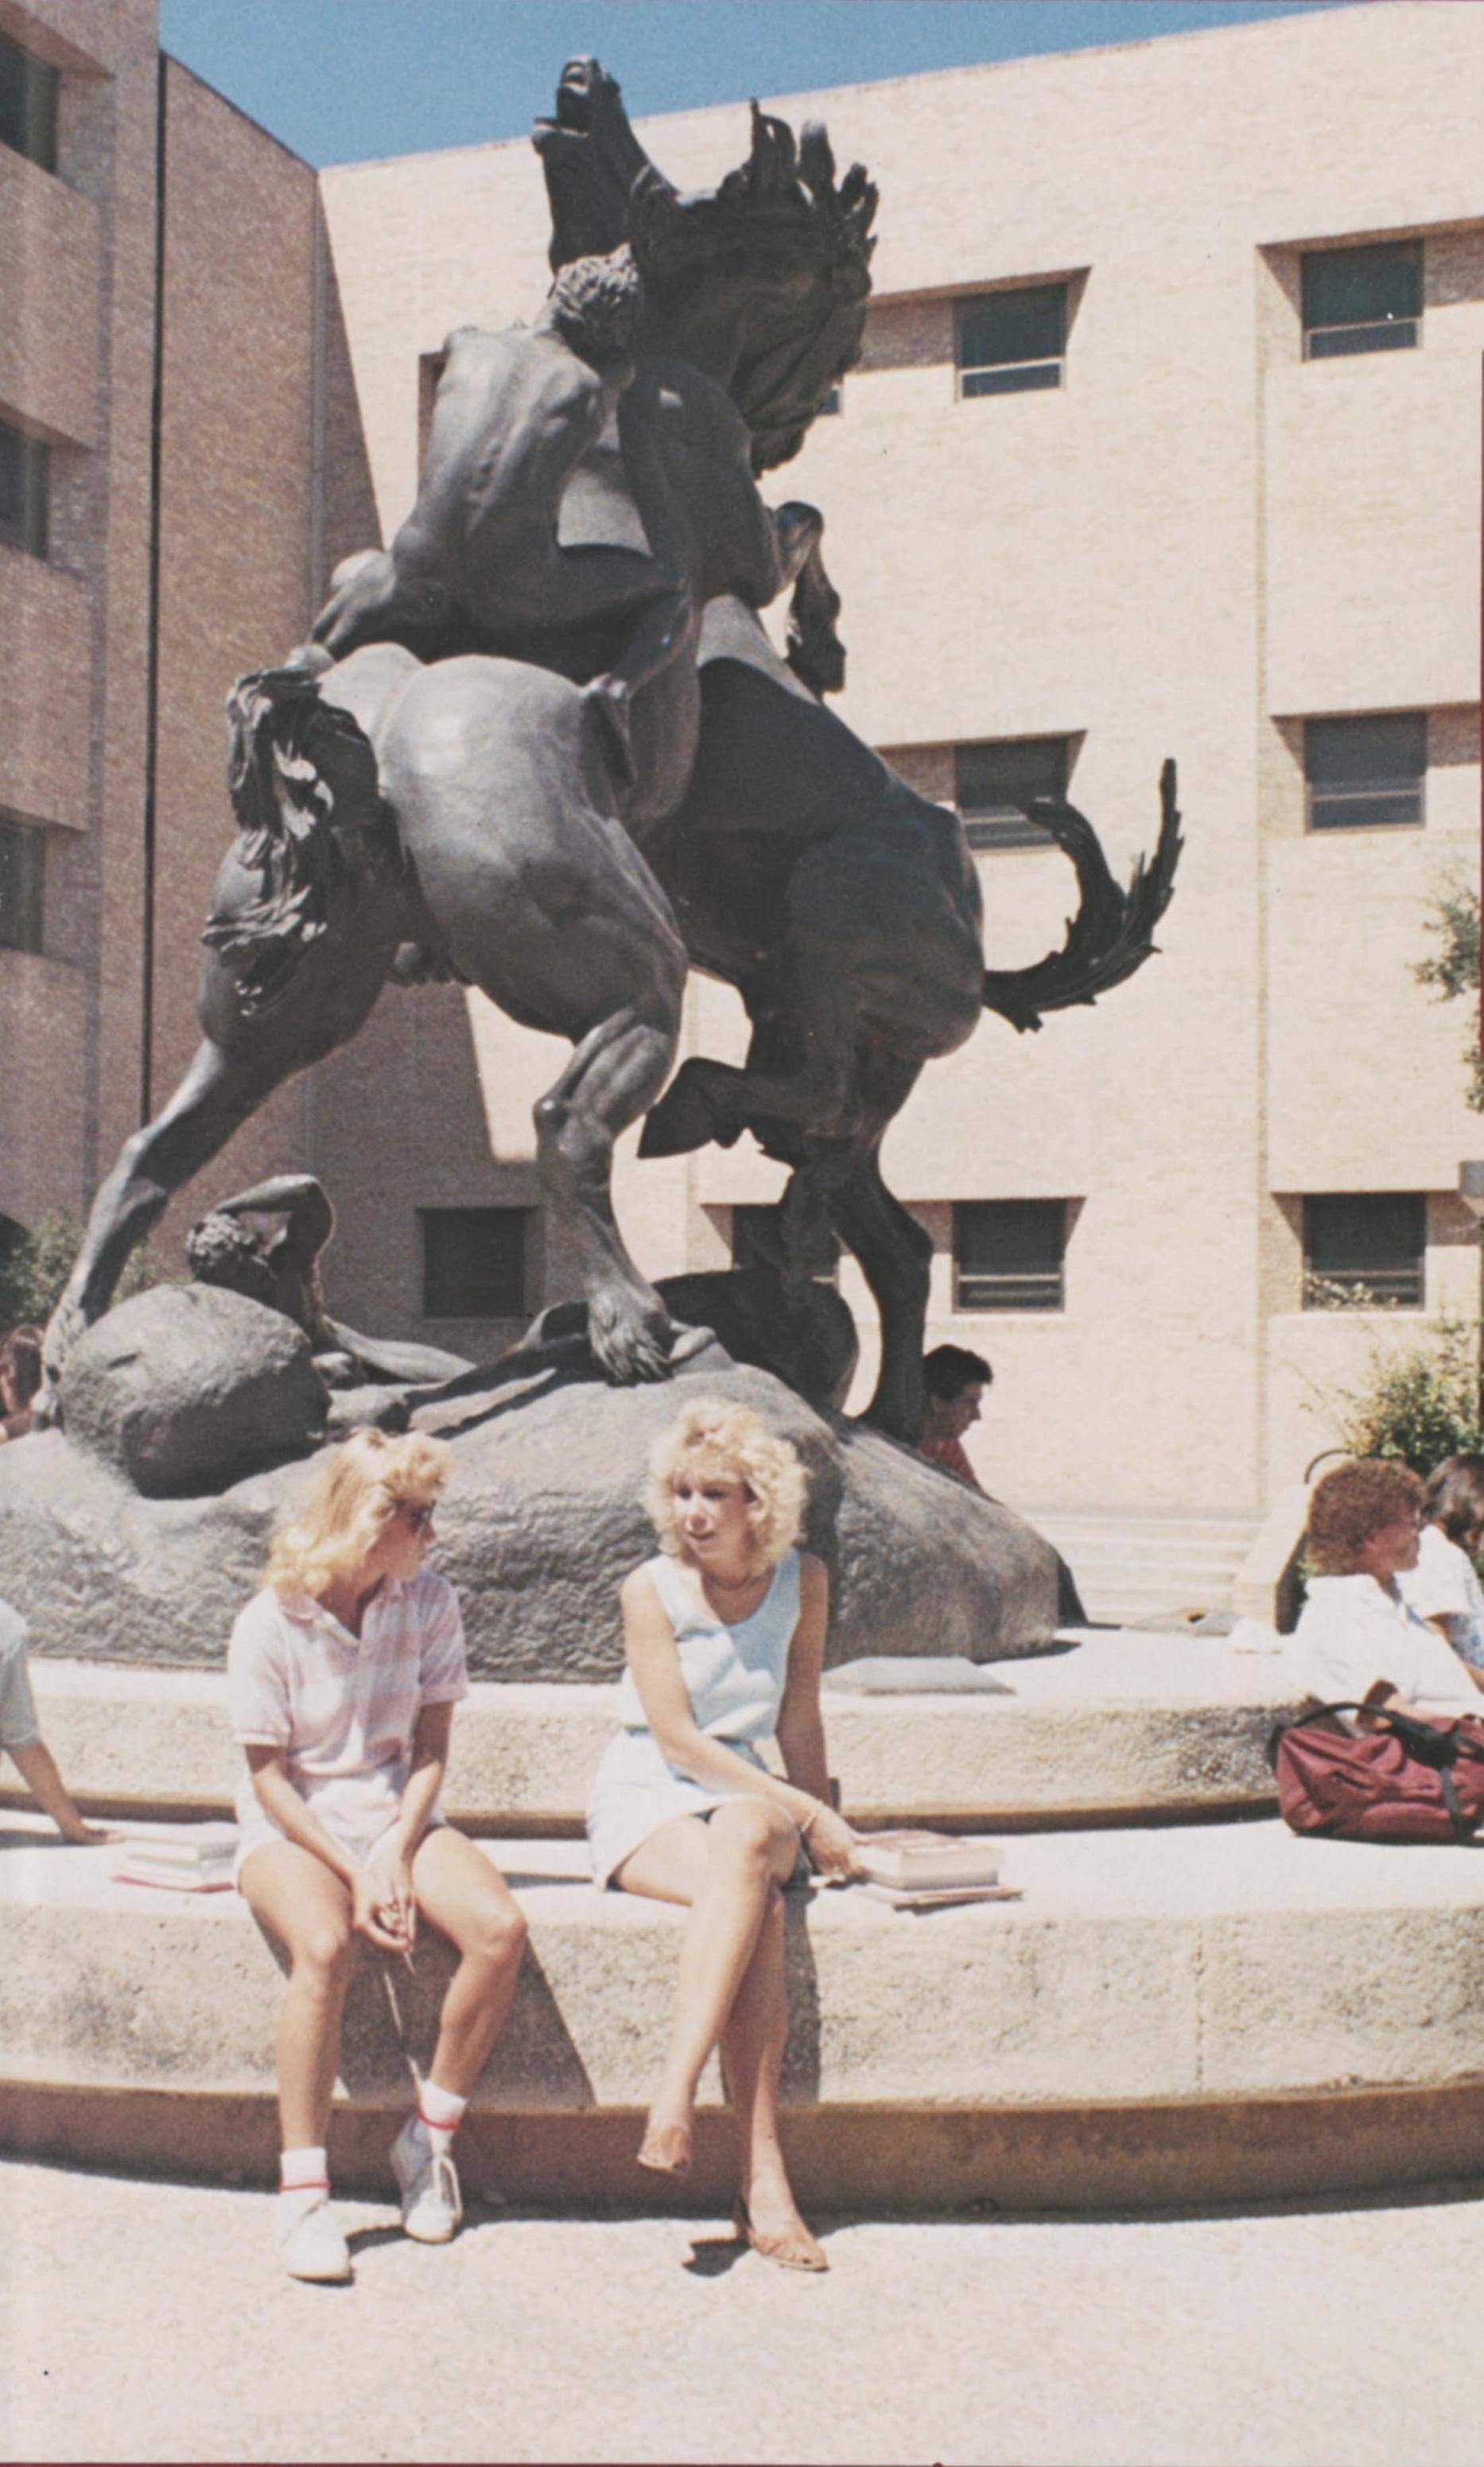 Students by the Stallions 1988